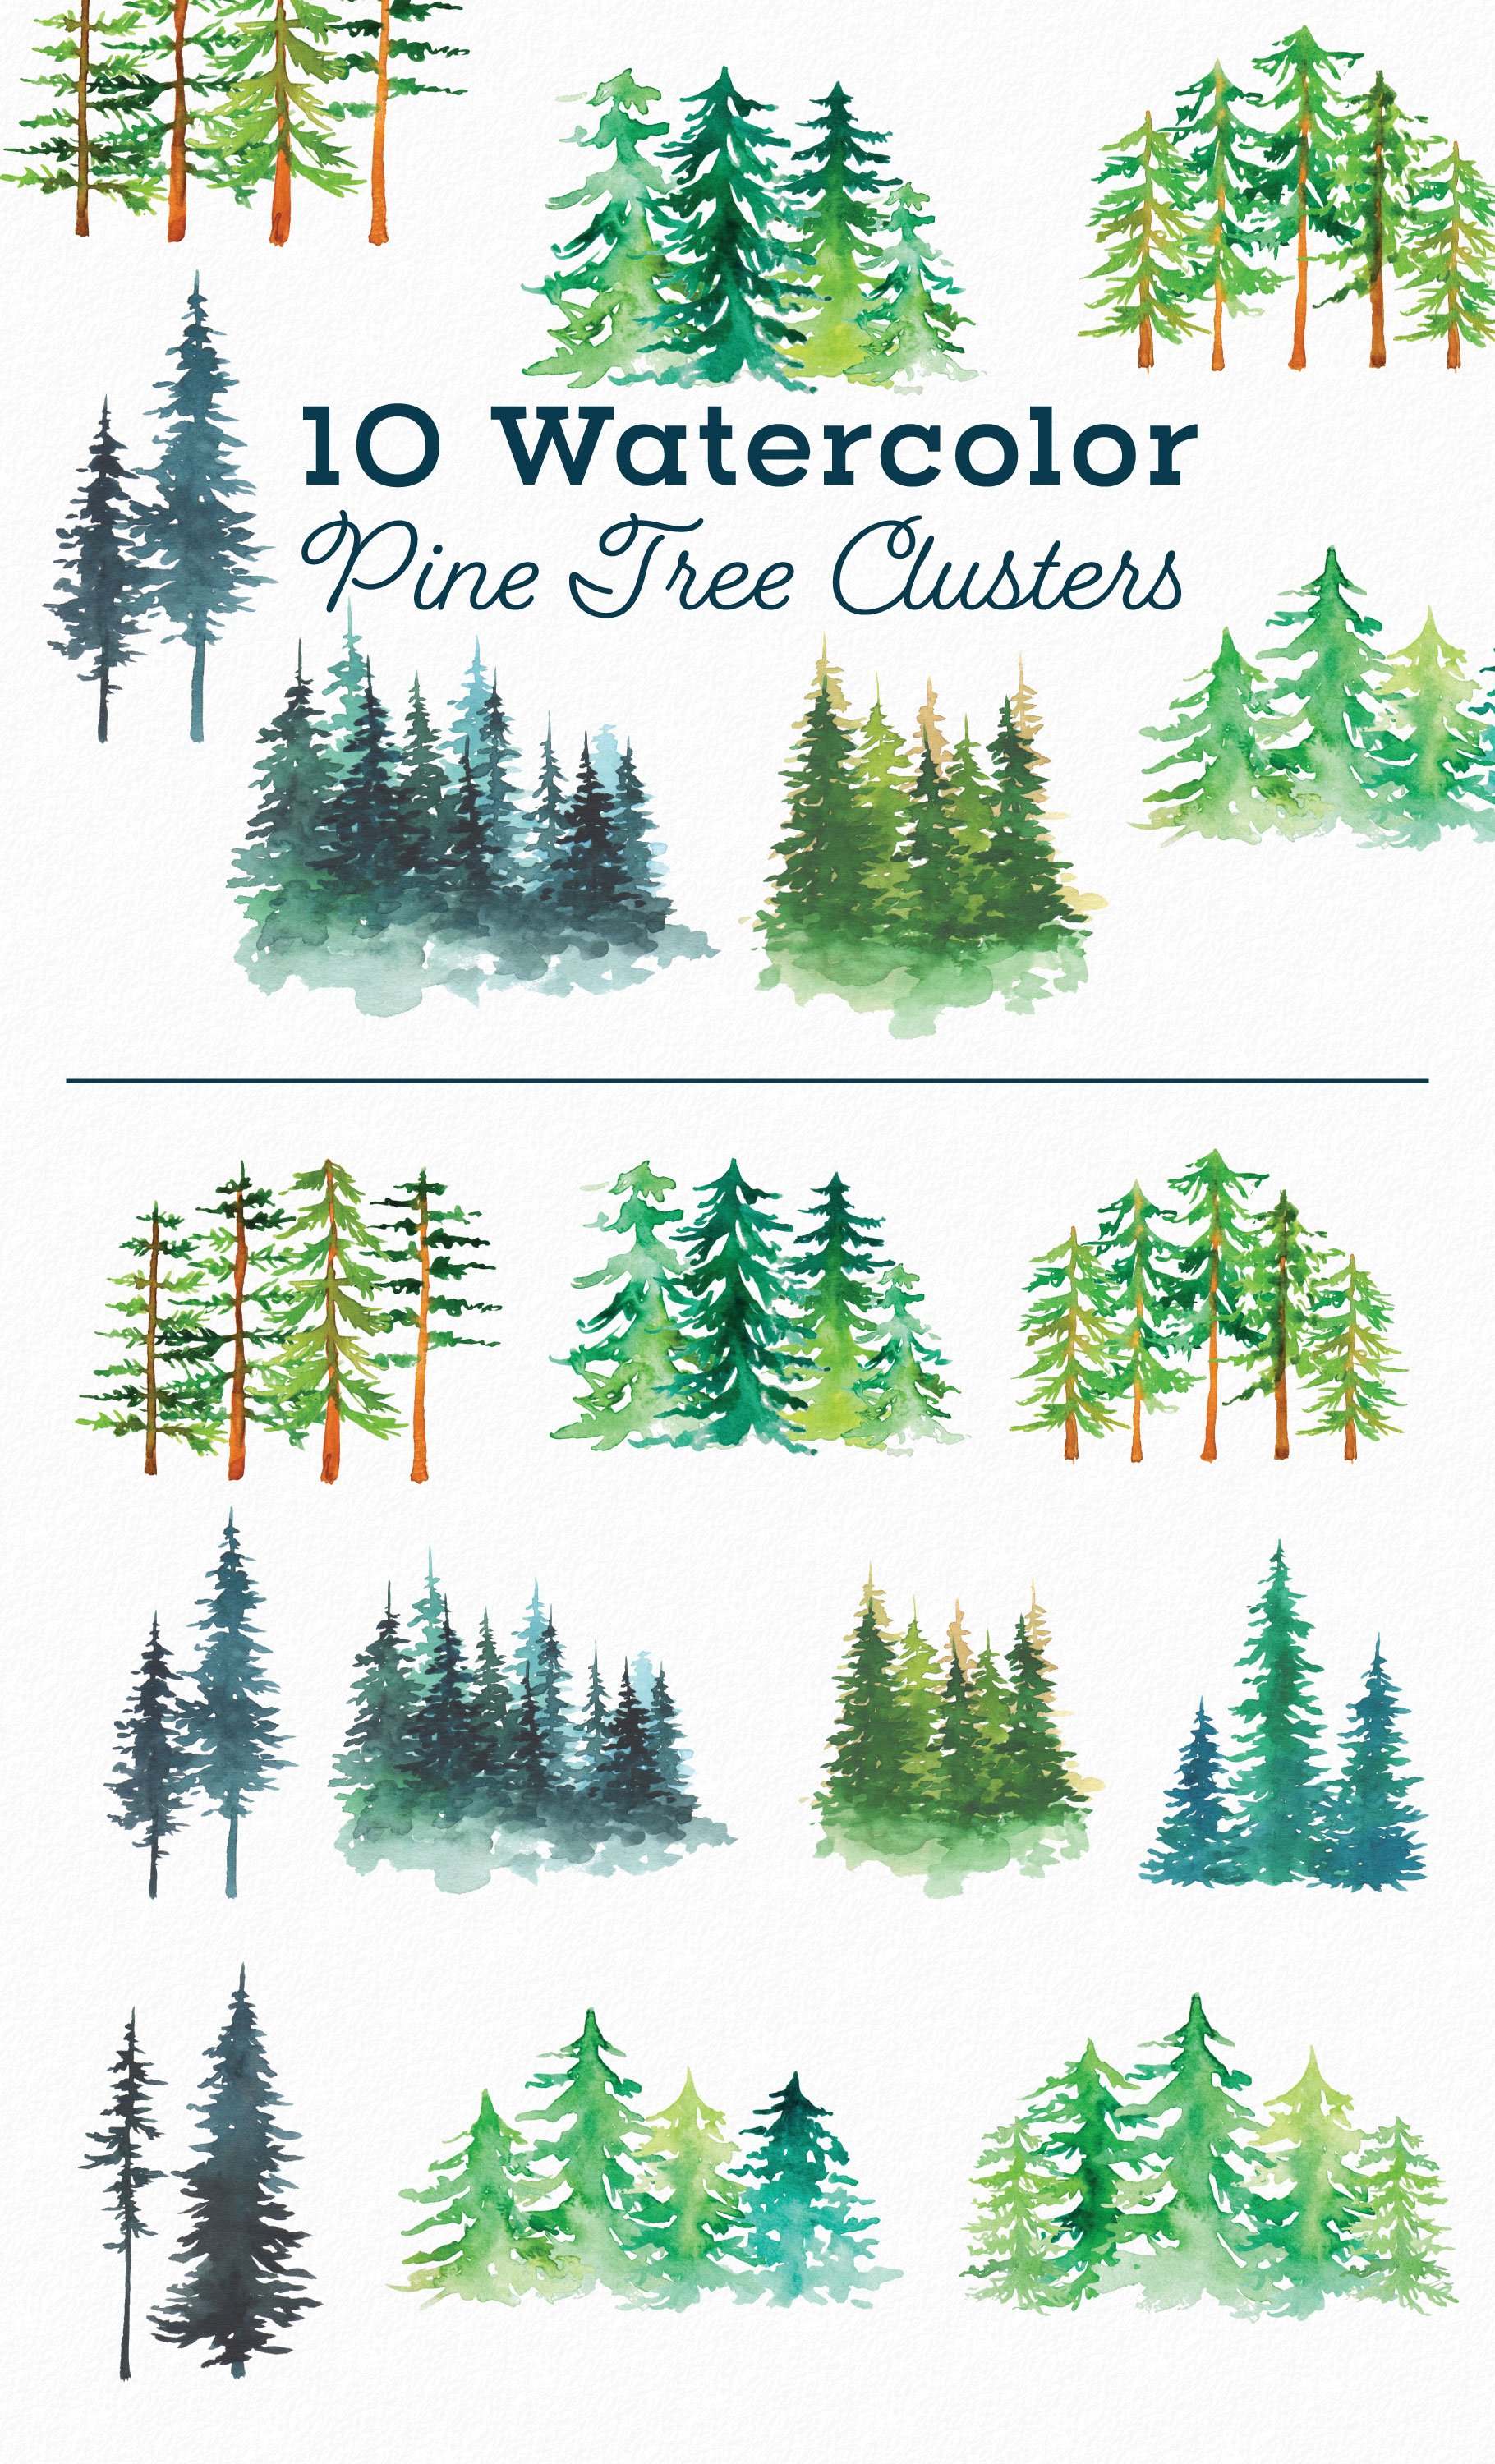 Watercolor pine tree clusterer is shown.